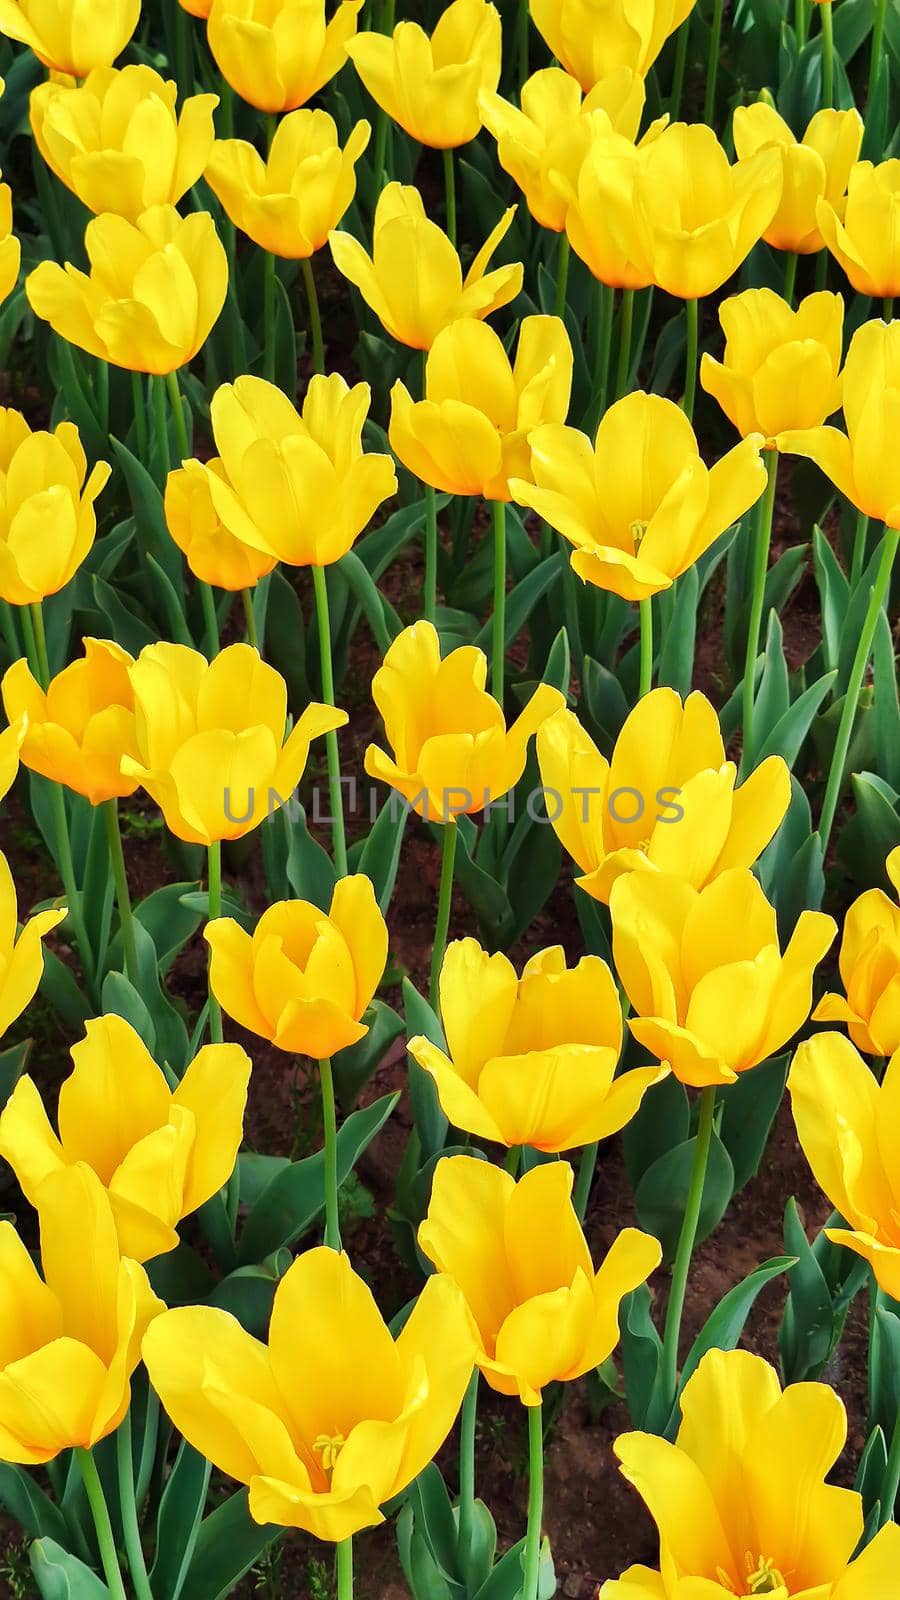 Background of yellow tulip flowers growing in garden. Vertical frame. by Laguna781